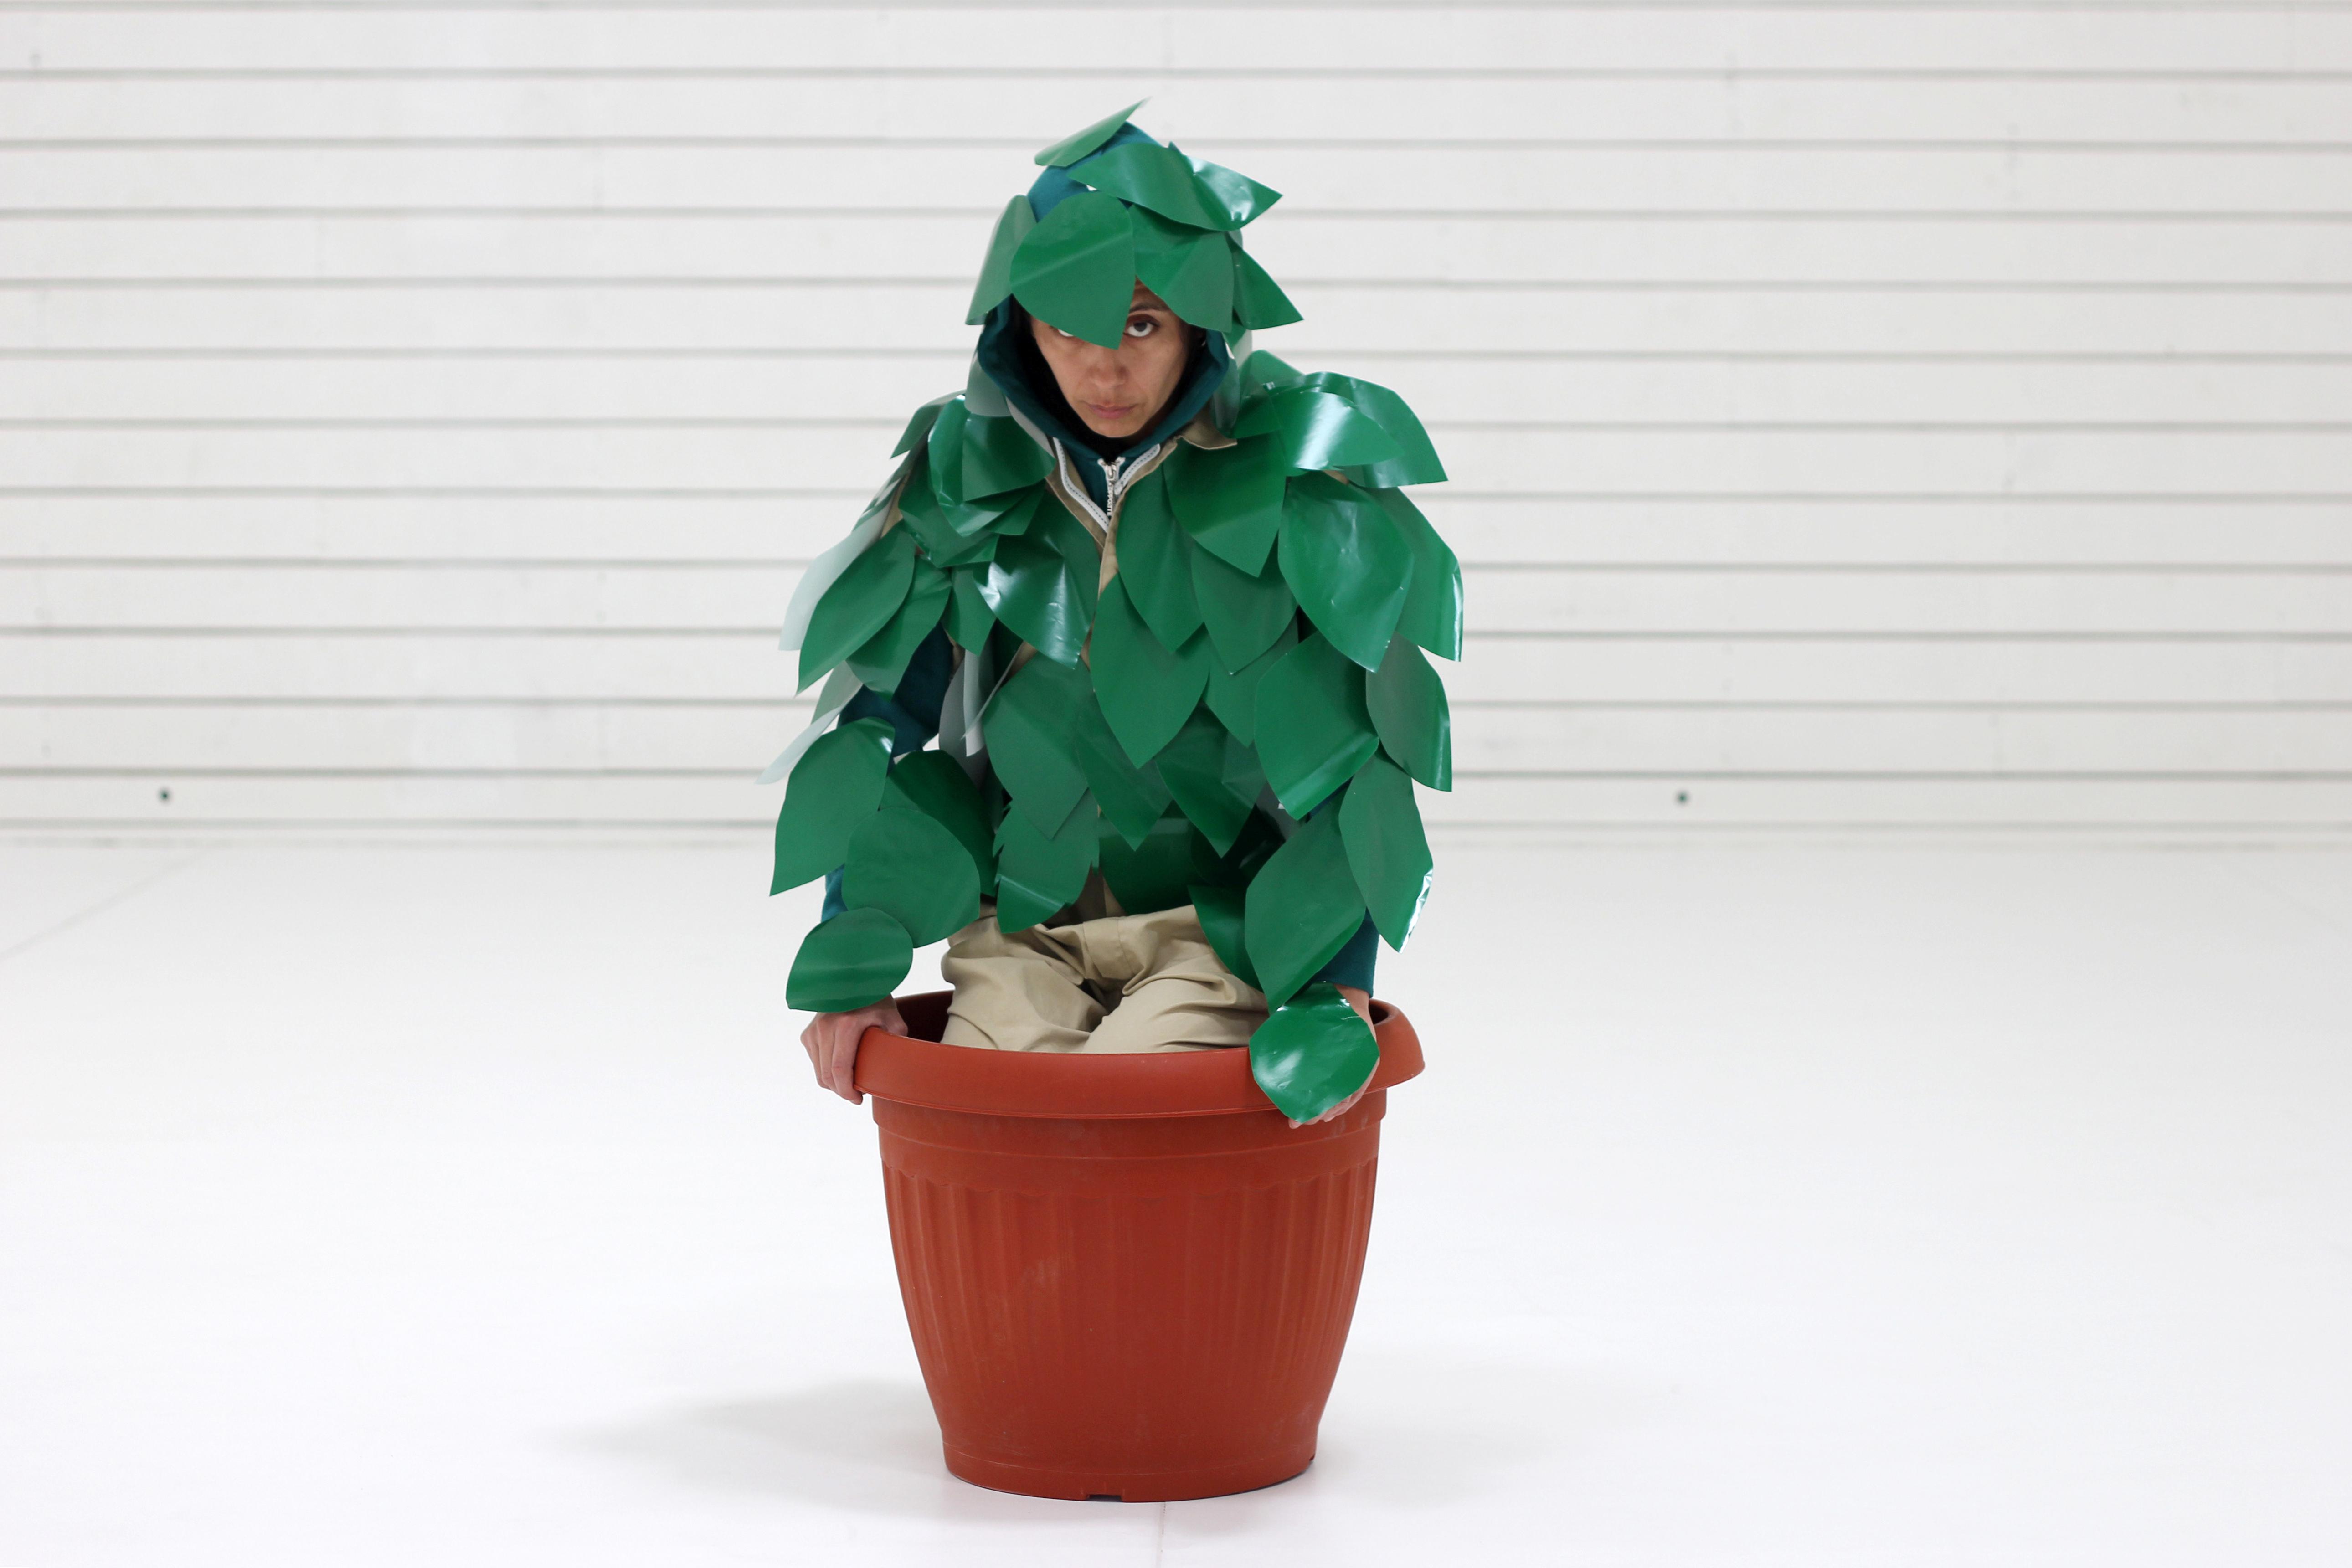 A person covered in shiny cut-out leaves squats in a large planter.